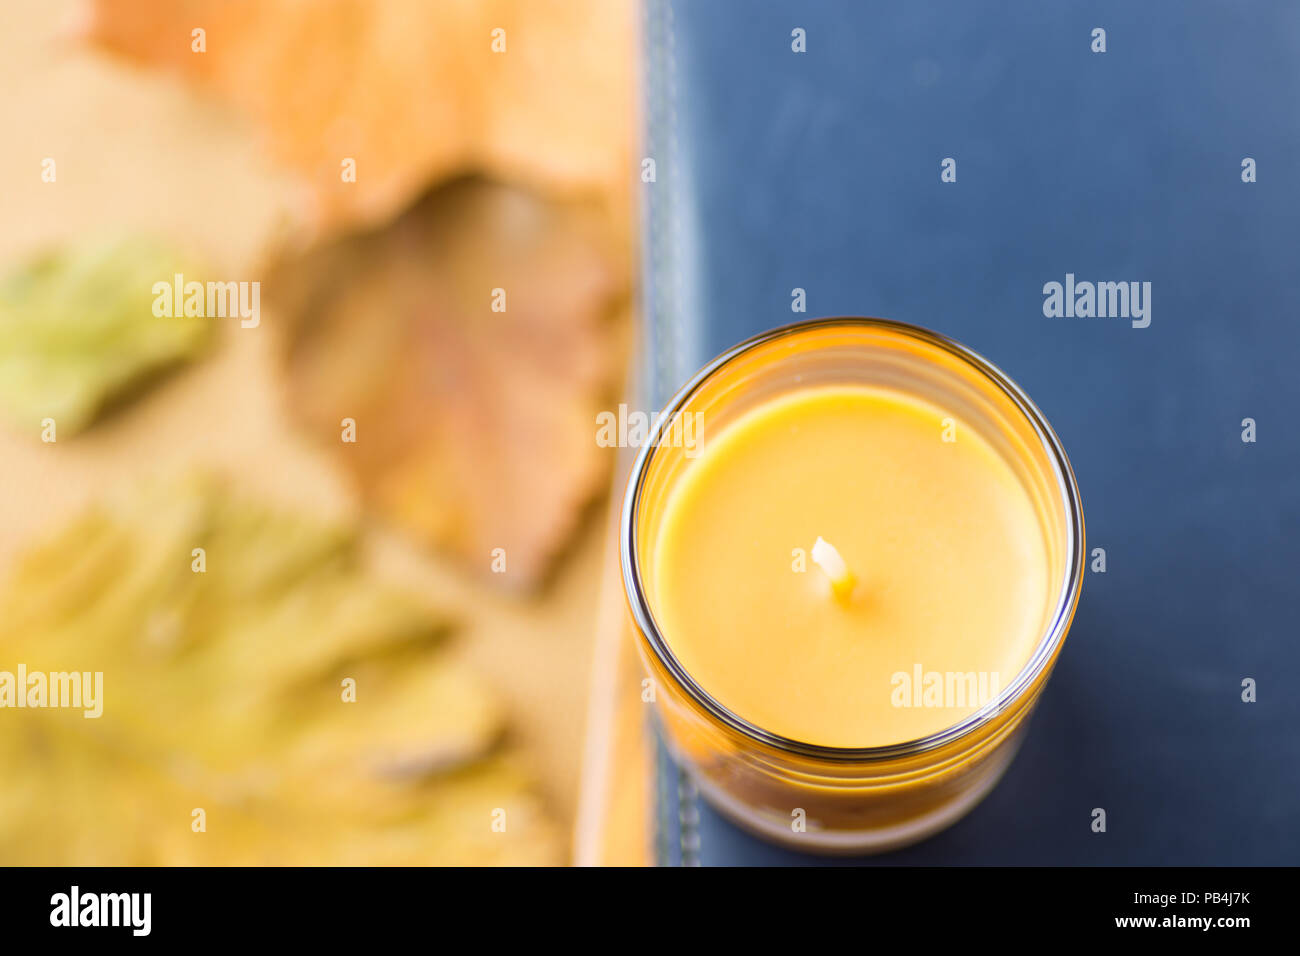 Orange Candle in Glass Holder on Pile of Books Dark Blue Navy Background. Dry Yellow Red Autumn Leaves. Cozy Fall Atmosphere. Poster Banner Template f Stock Photo